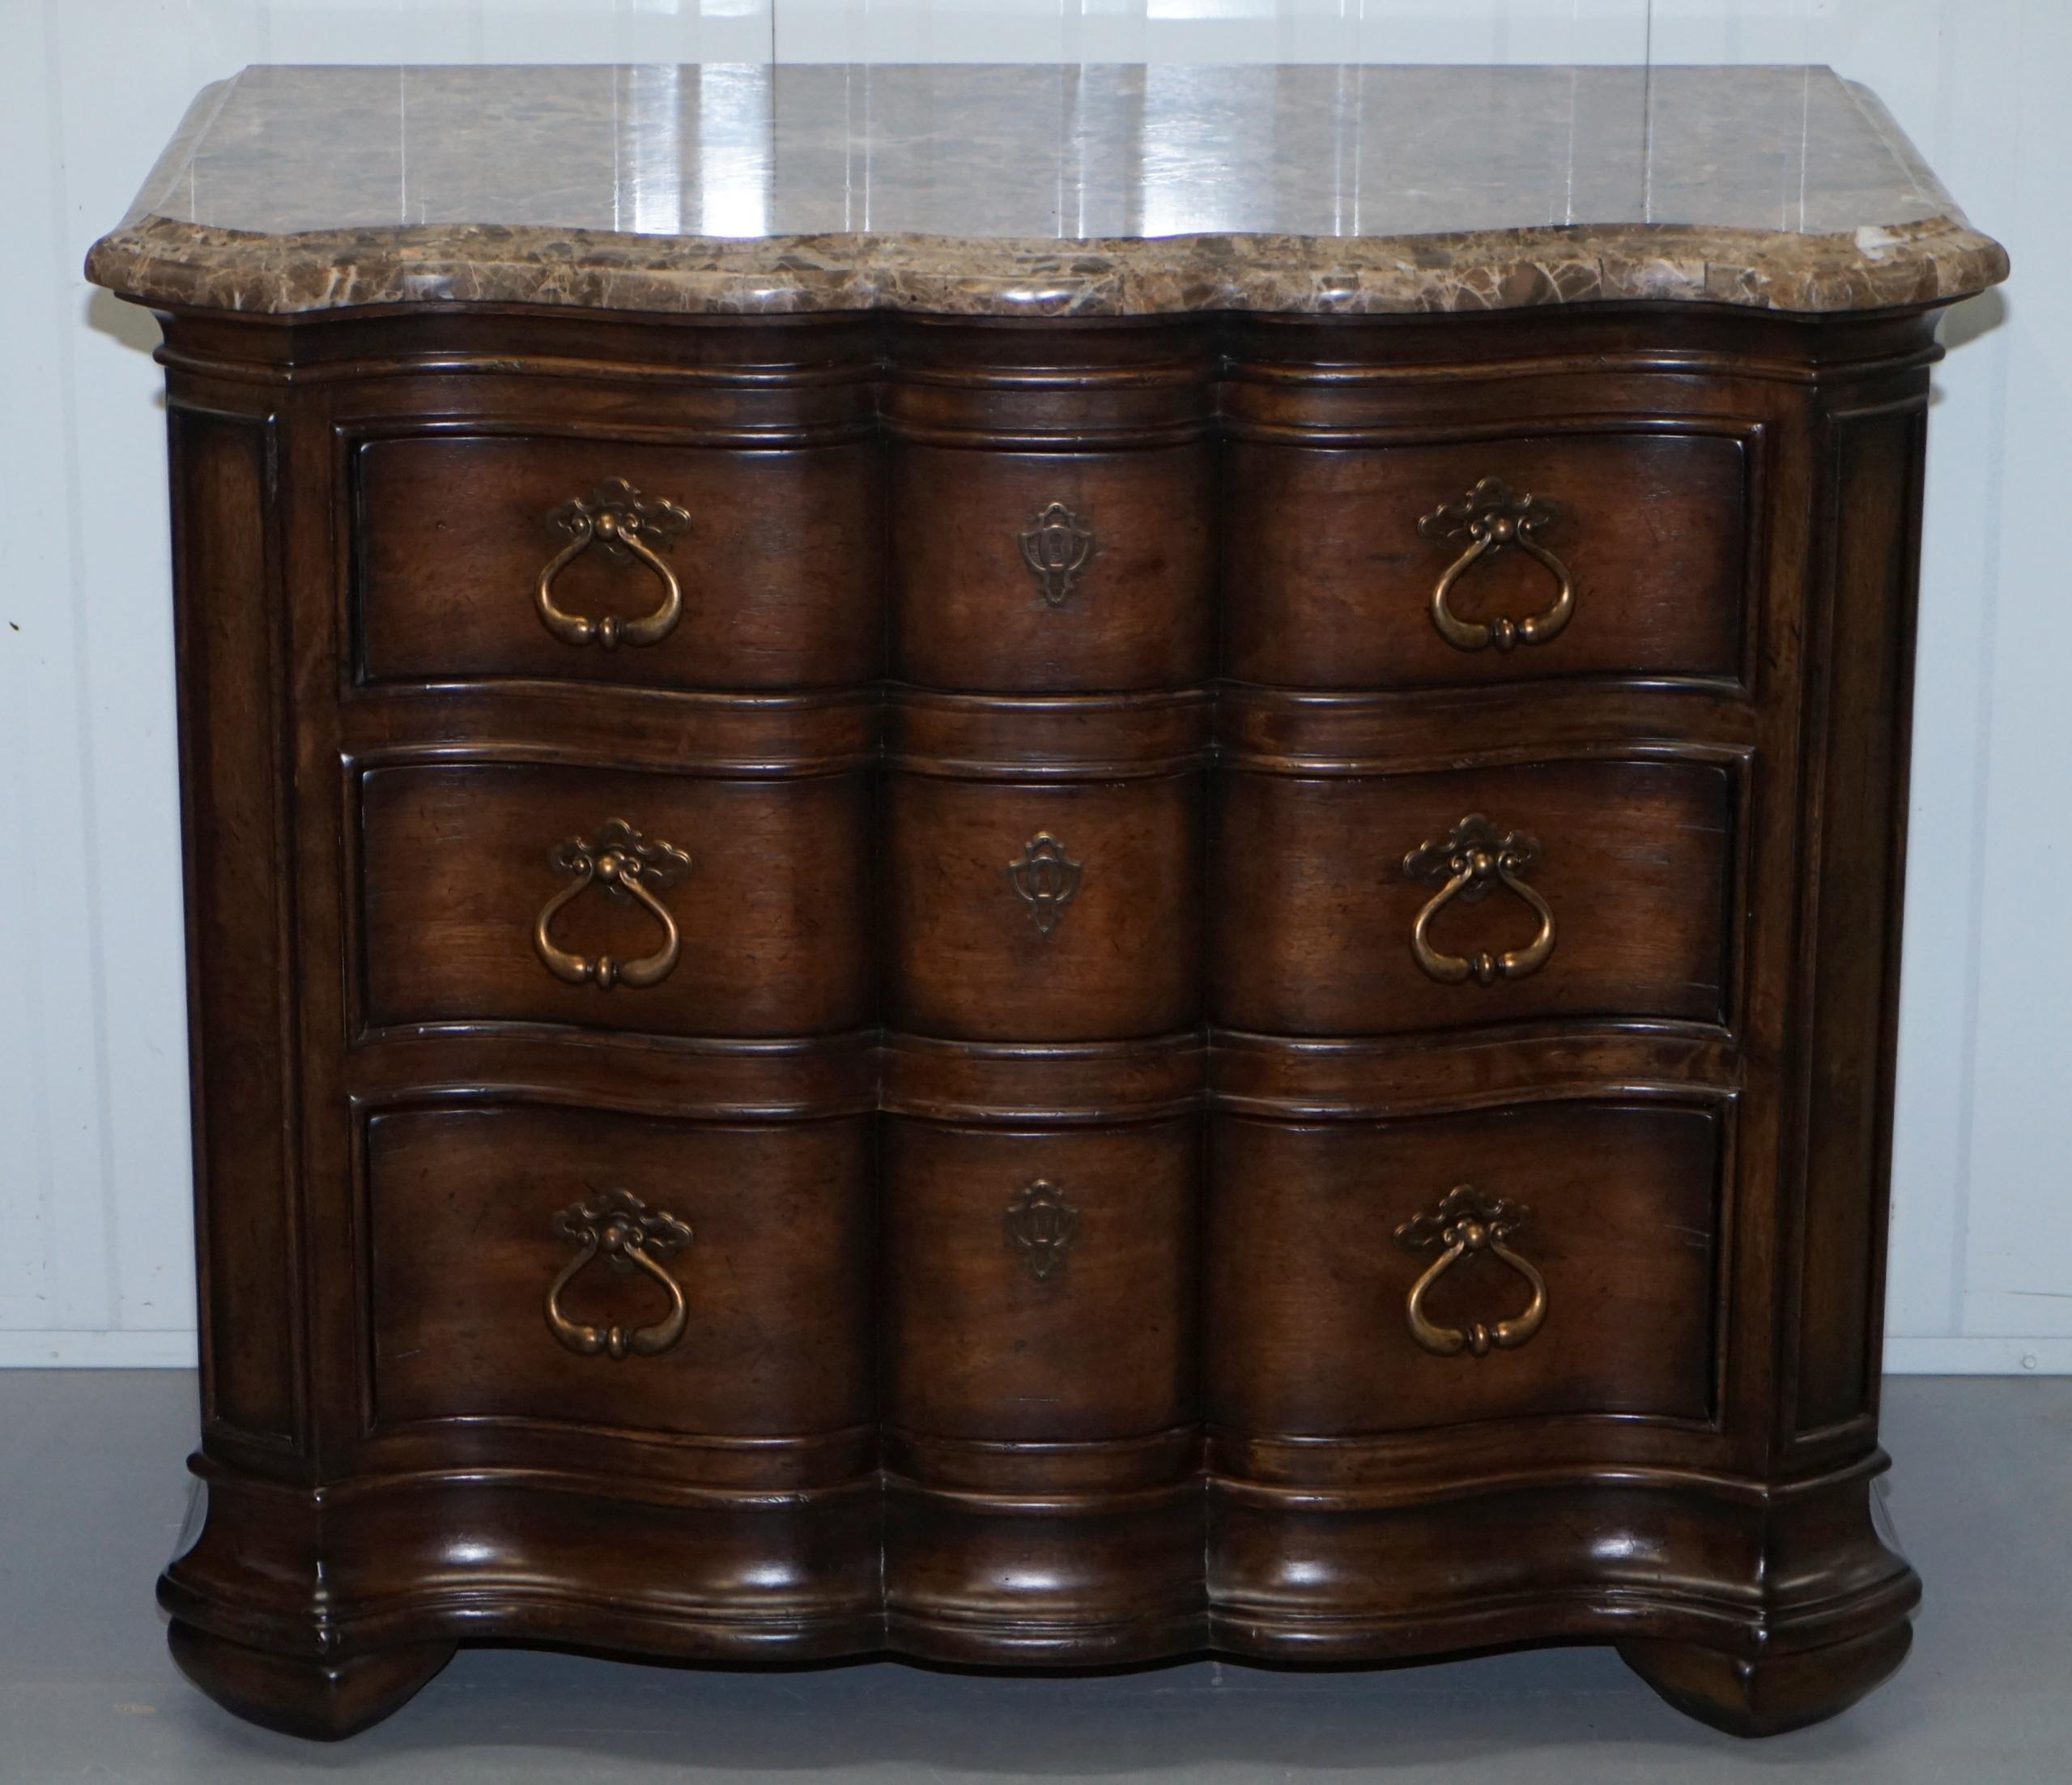 We are delighted to offer for sale this stunning Thomasville Lucca small chest of drawers with solid marble top

A city long admired for its olive oil and architecture is reflected in the character of the 3-drawer Lucca nightstand with Dark